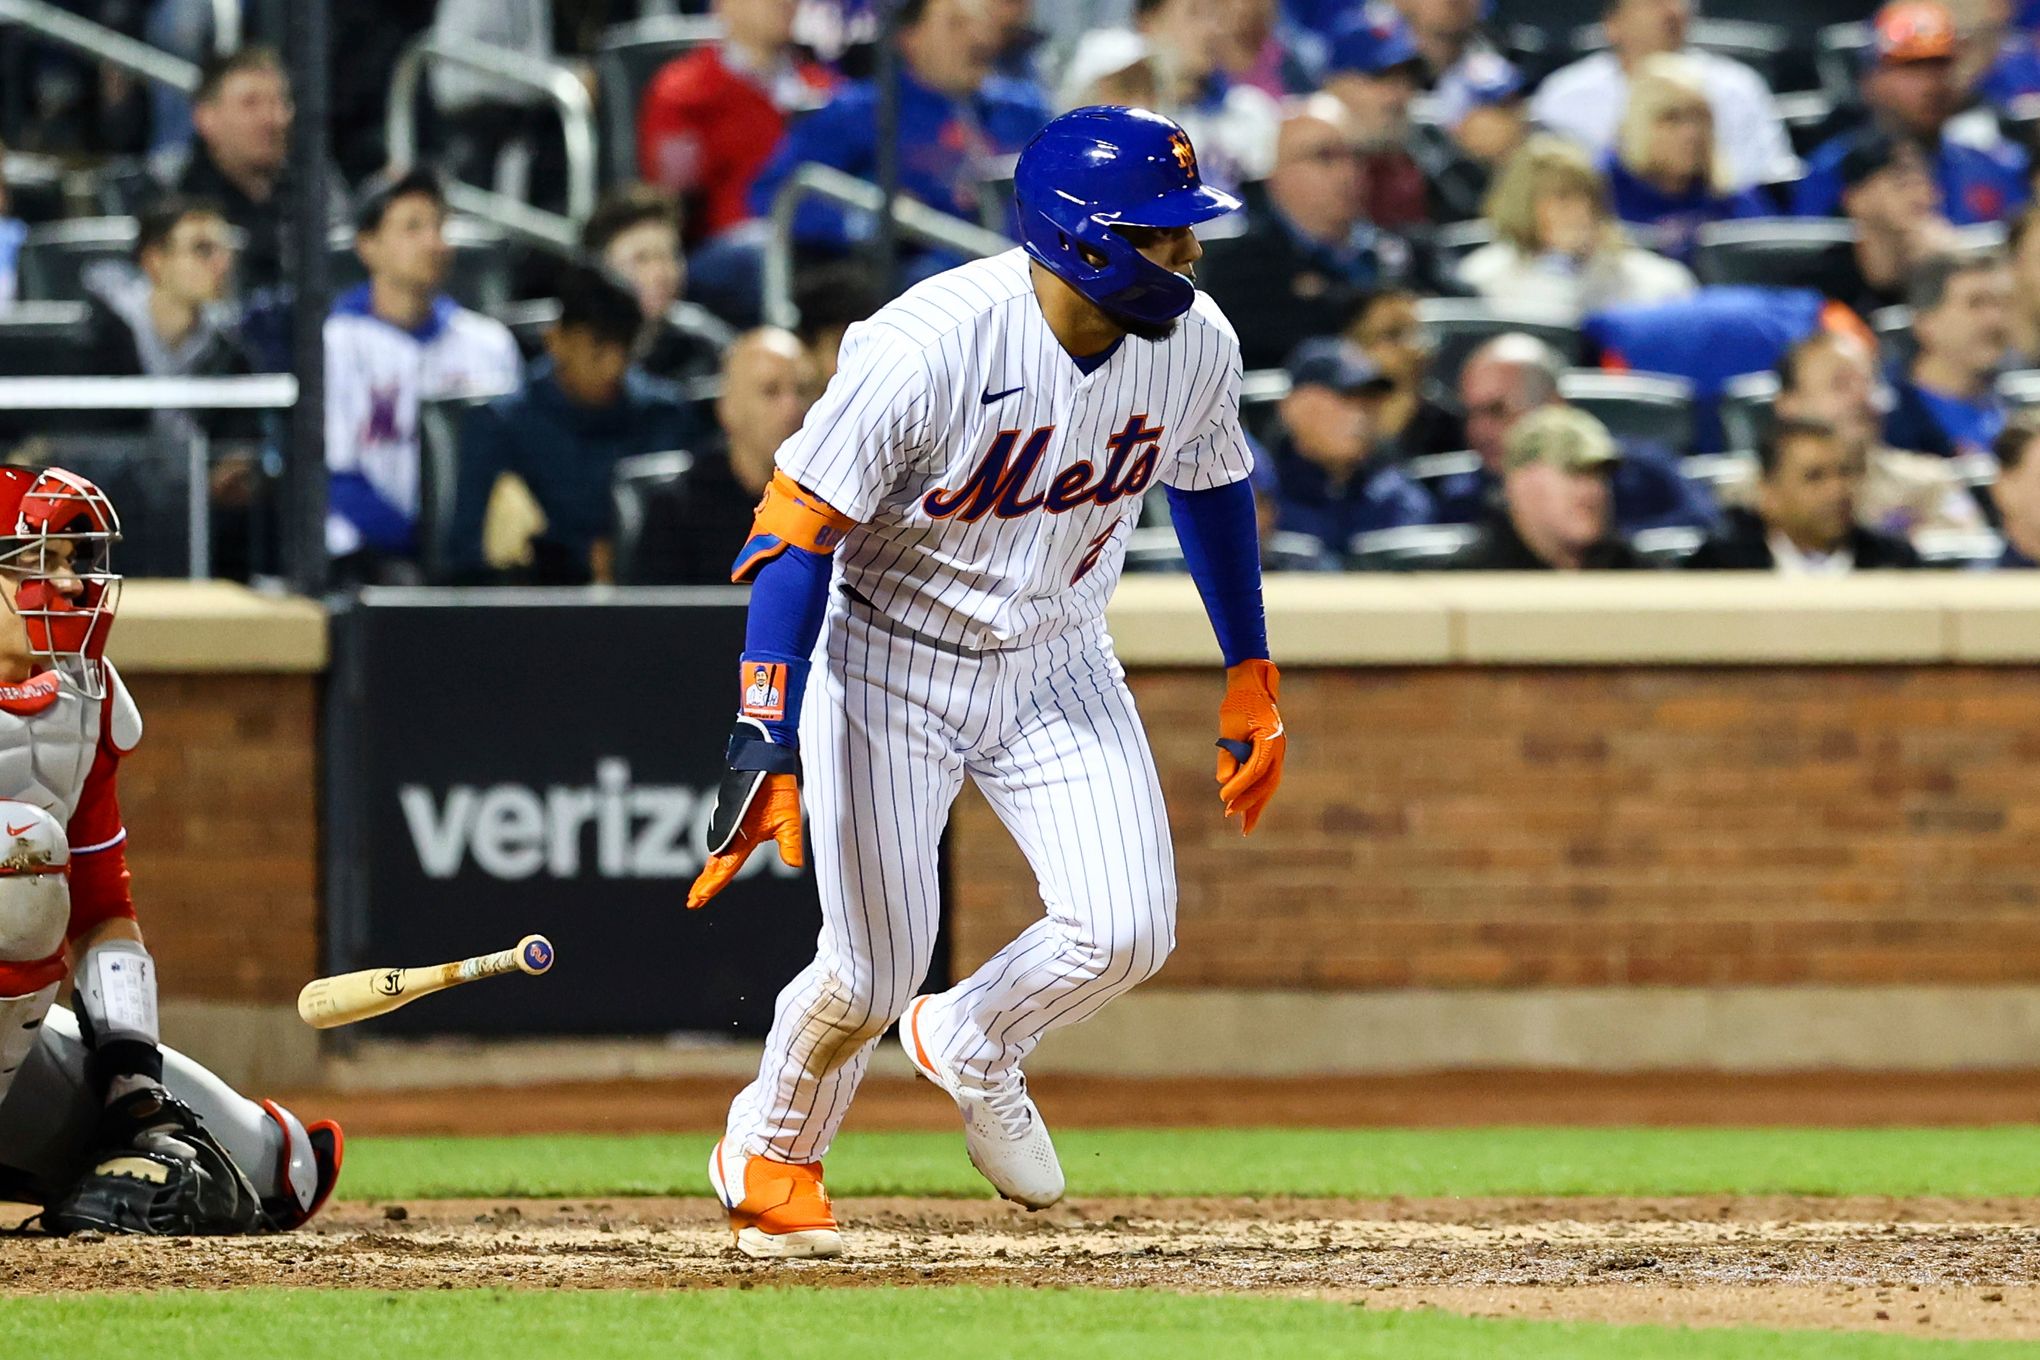 NY Mets: Robinson Cano picked the wrong week to tweet Mets